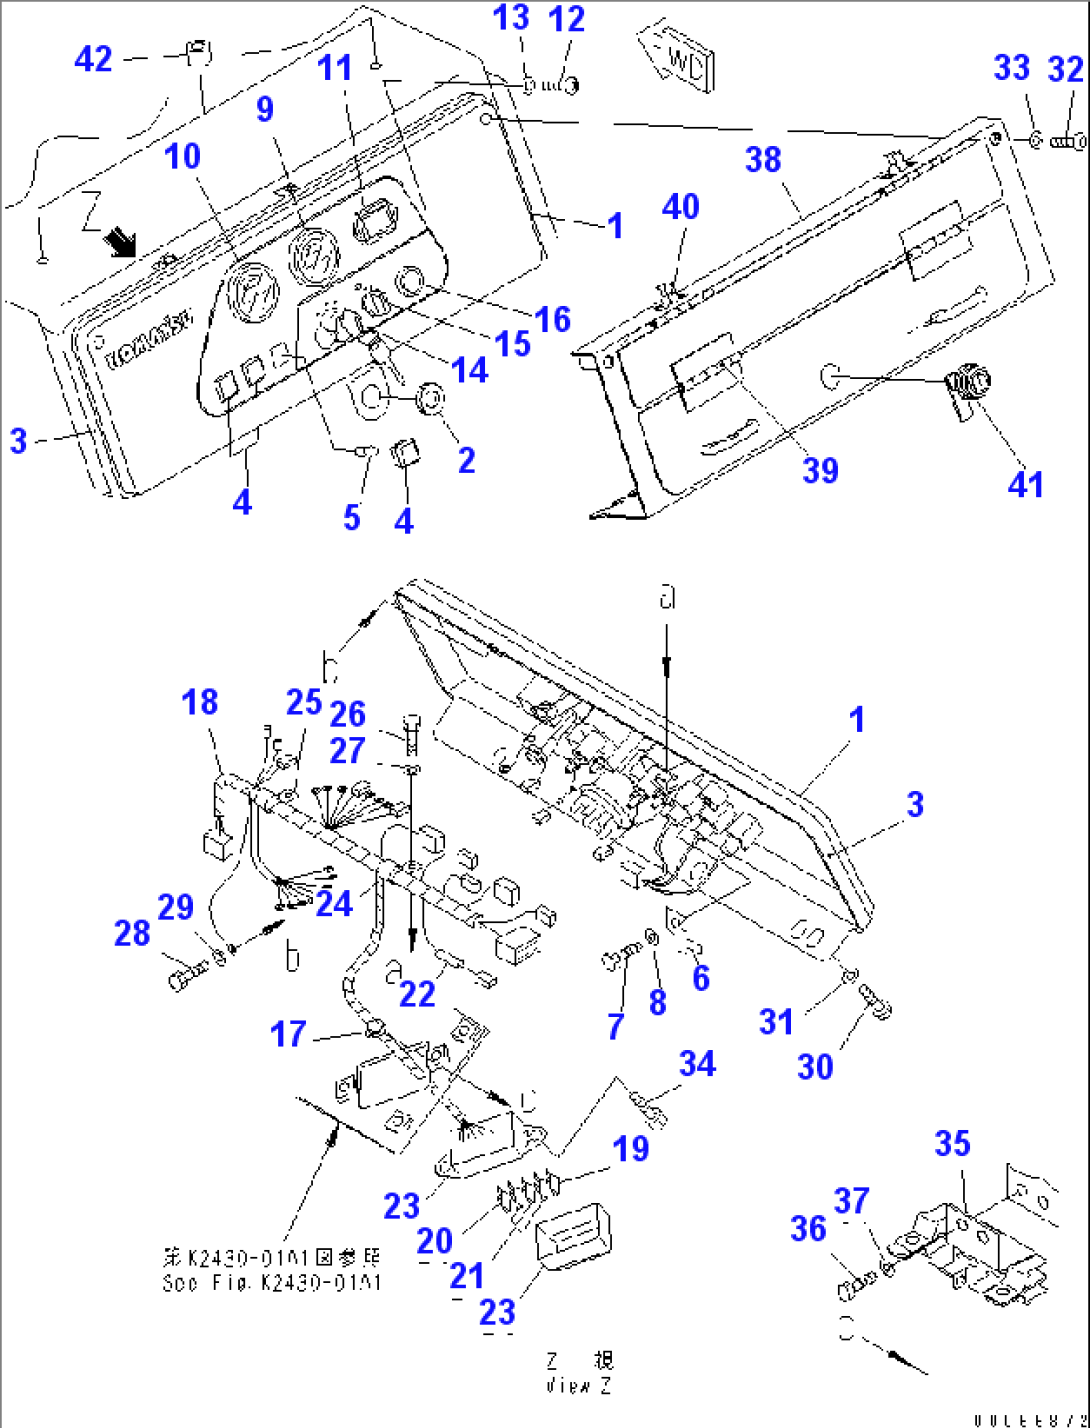 PANEL (FOR MONO LEVER STEERING) (WITH VANDALISM PROTECTION)(#90001-)